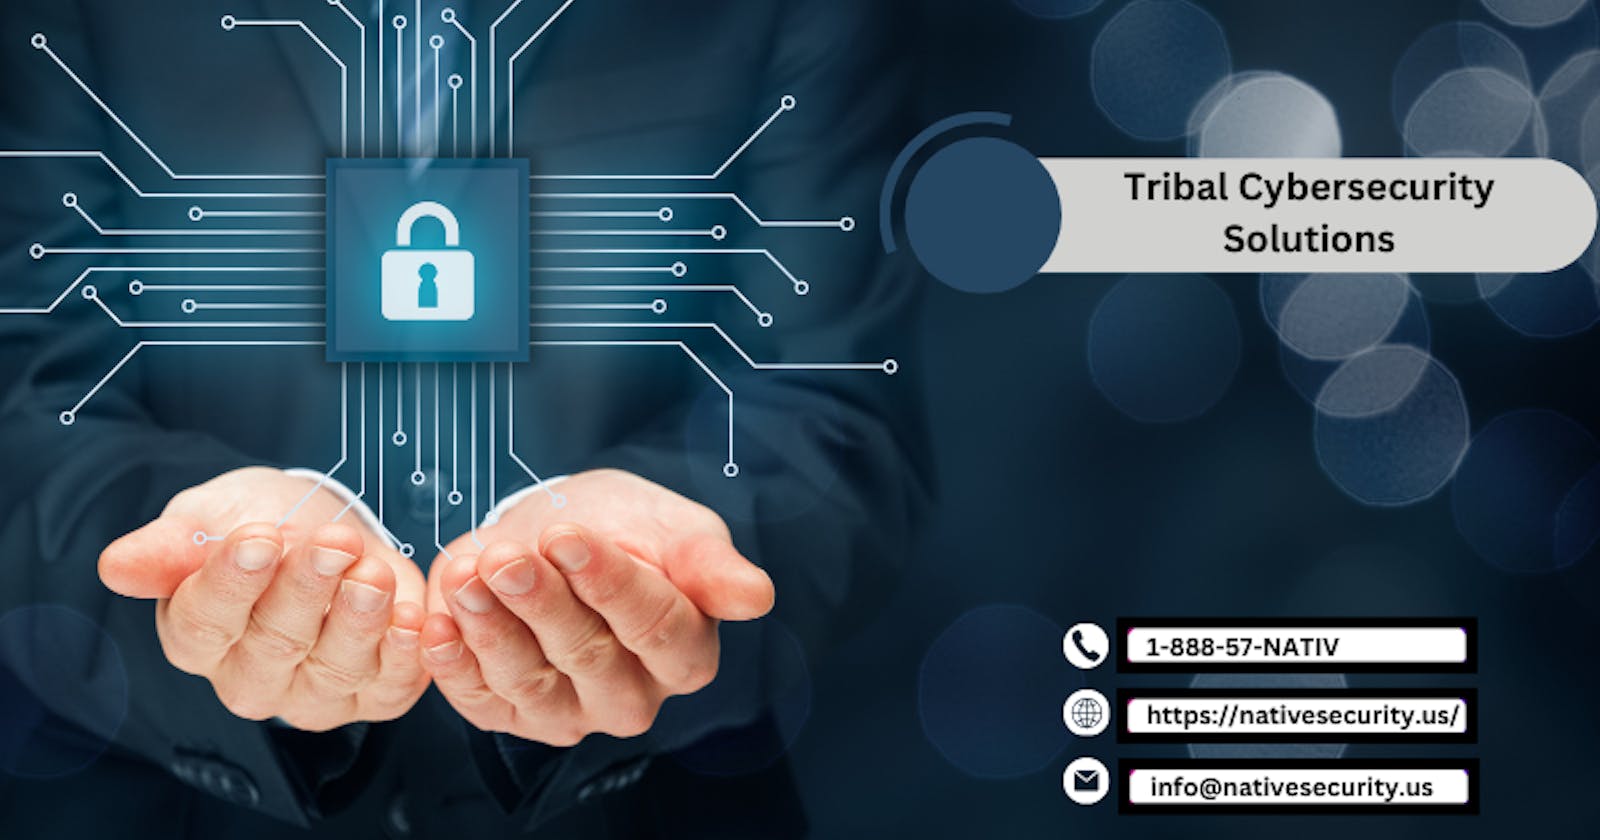 IT Solution for Tribal Nations